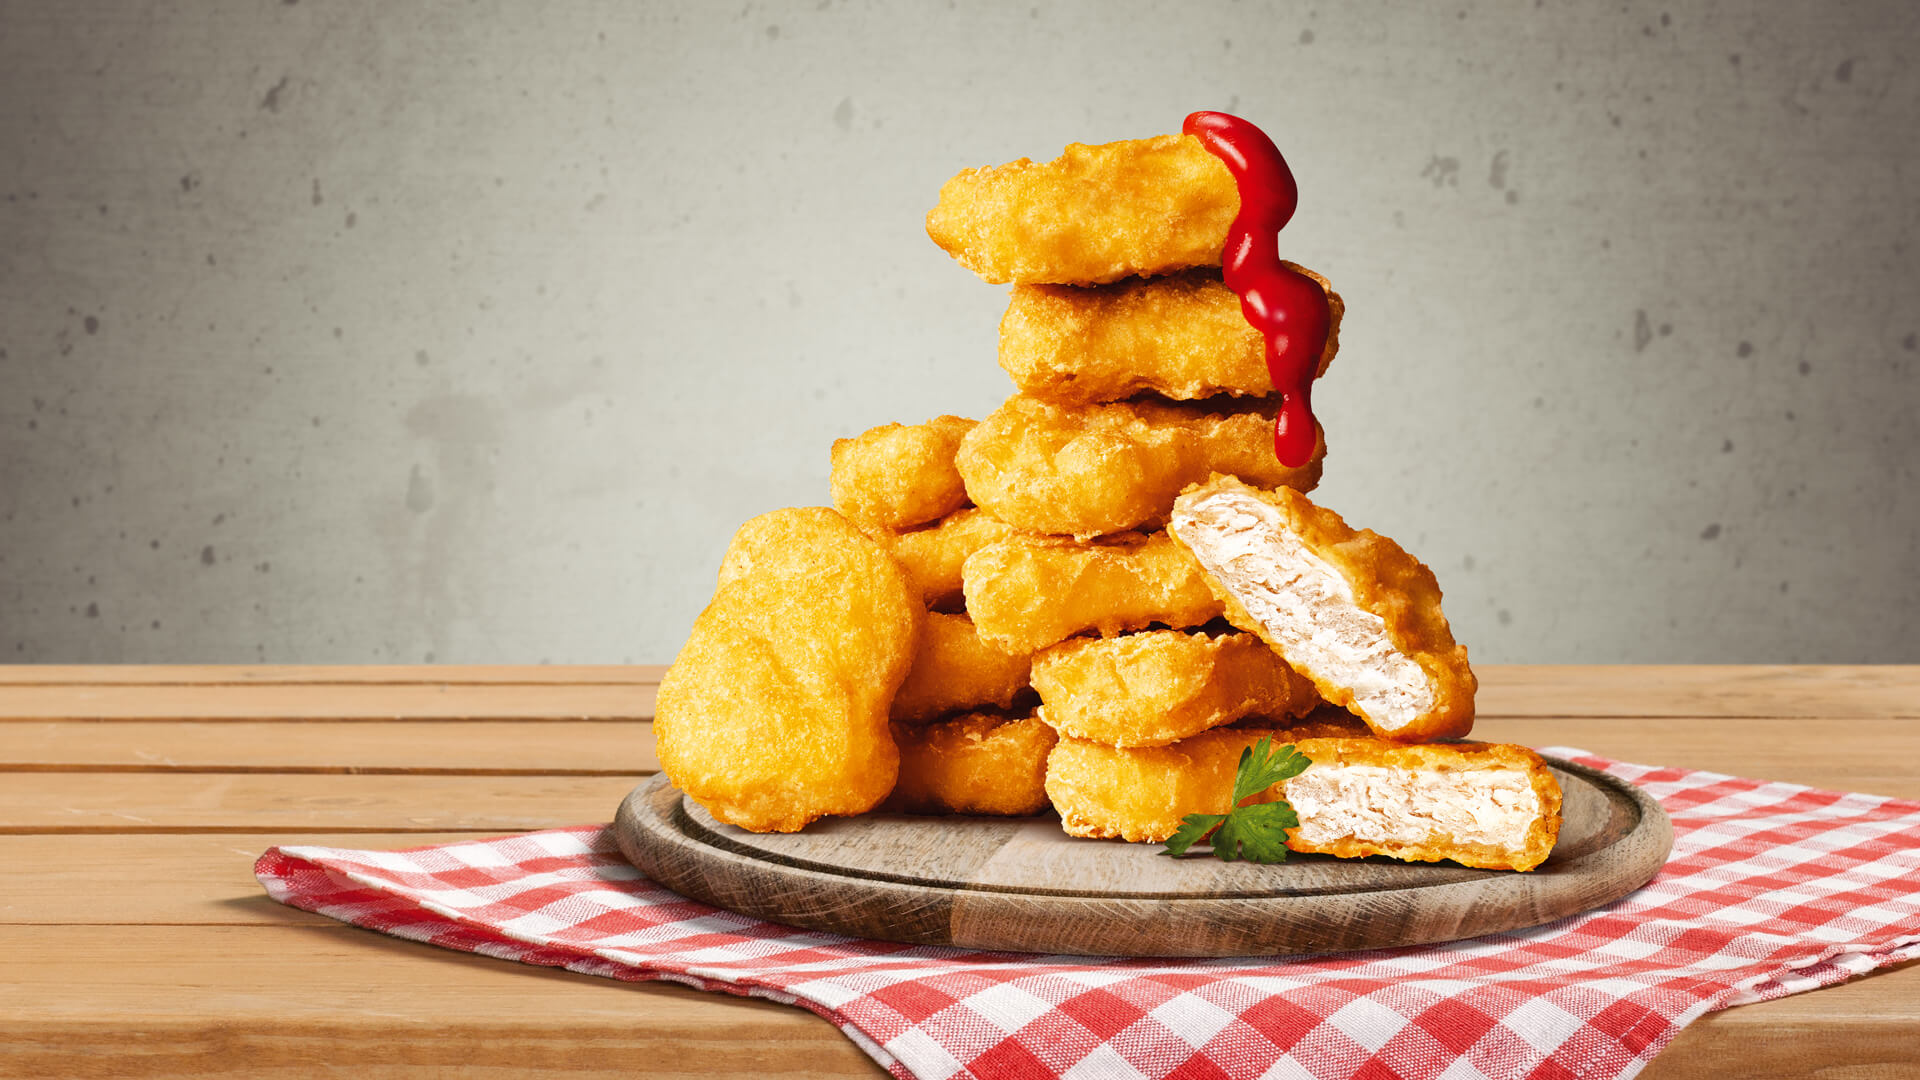 Gluten-free Living: a stack of Tegel crispy tempura battered chicken nuggets with tomato sauce